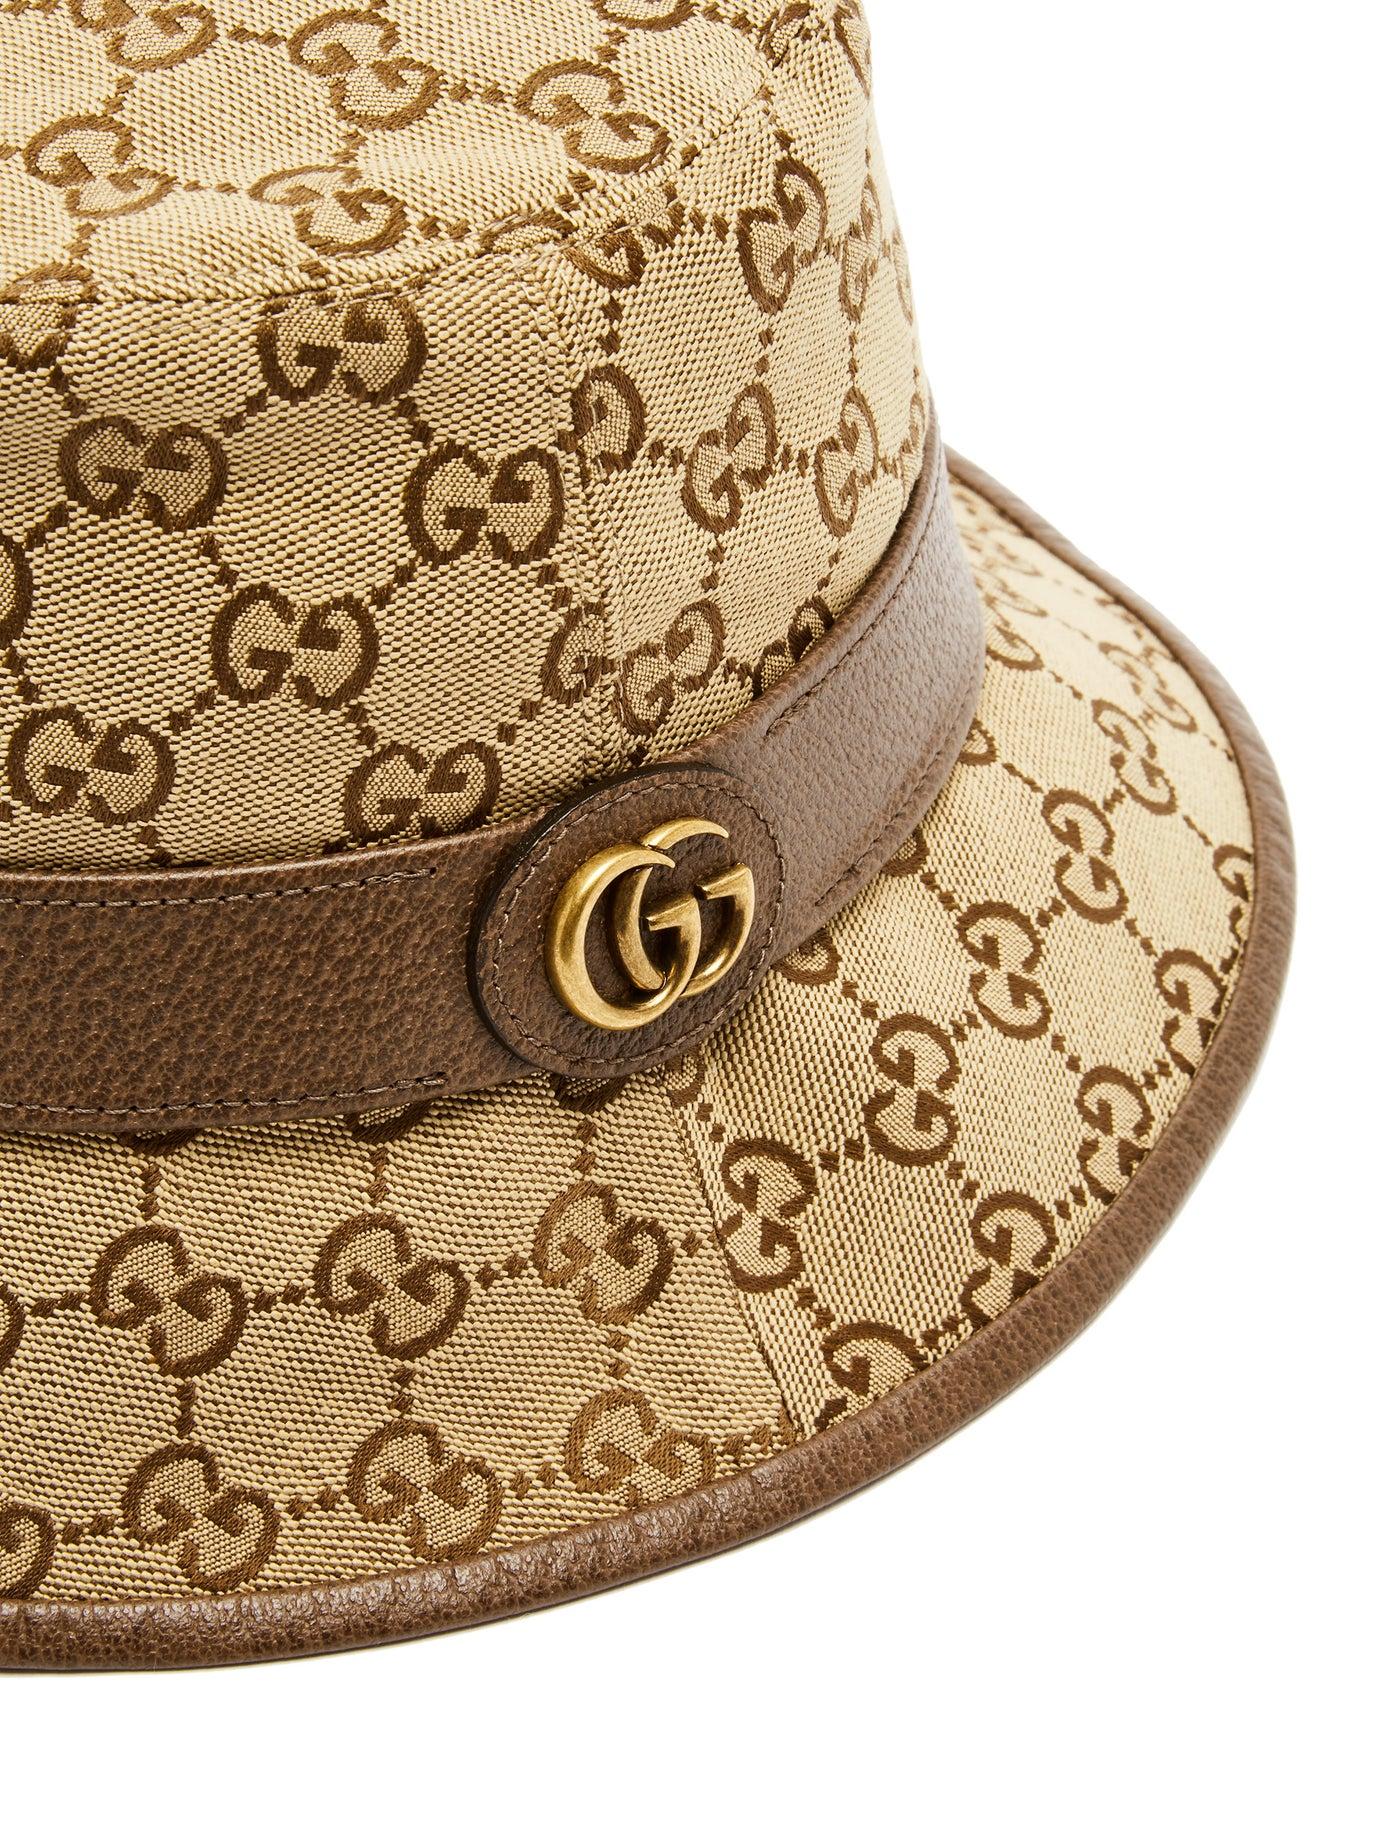 Gucci GG Supreme Canvas Bucket Hat in Beige (Natural) for Men - Lyst